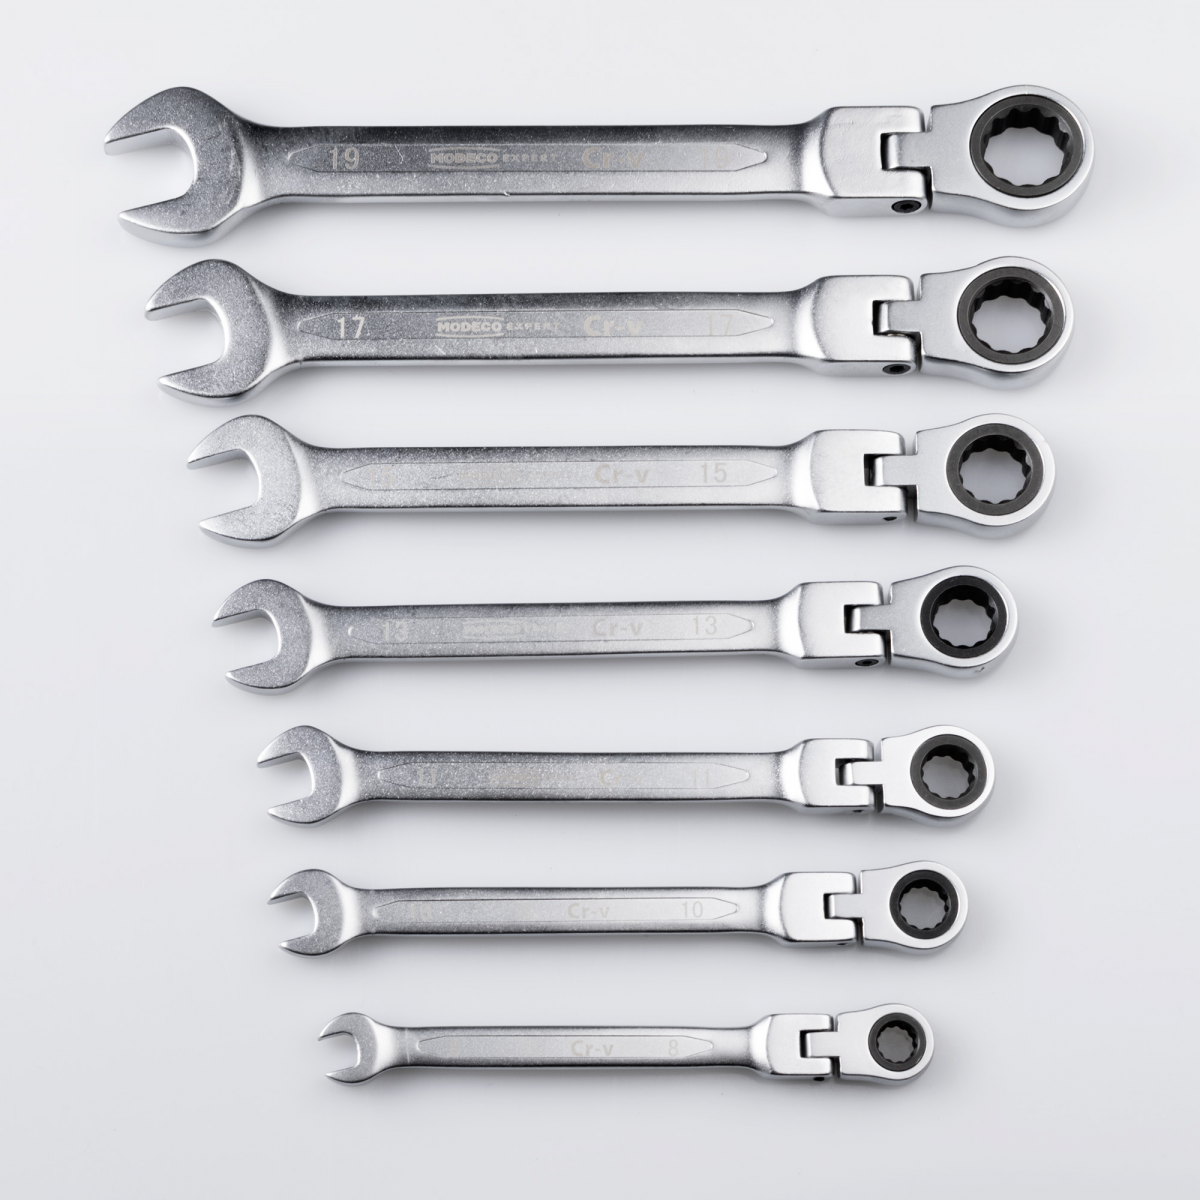 MN-59-757 Set of 7 combination wrenches with ratchet and joint